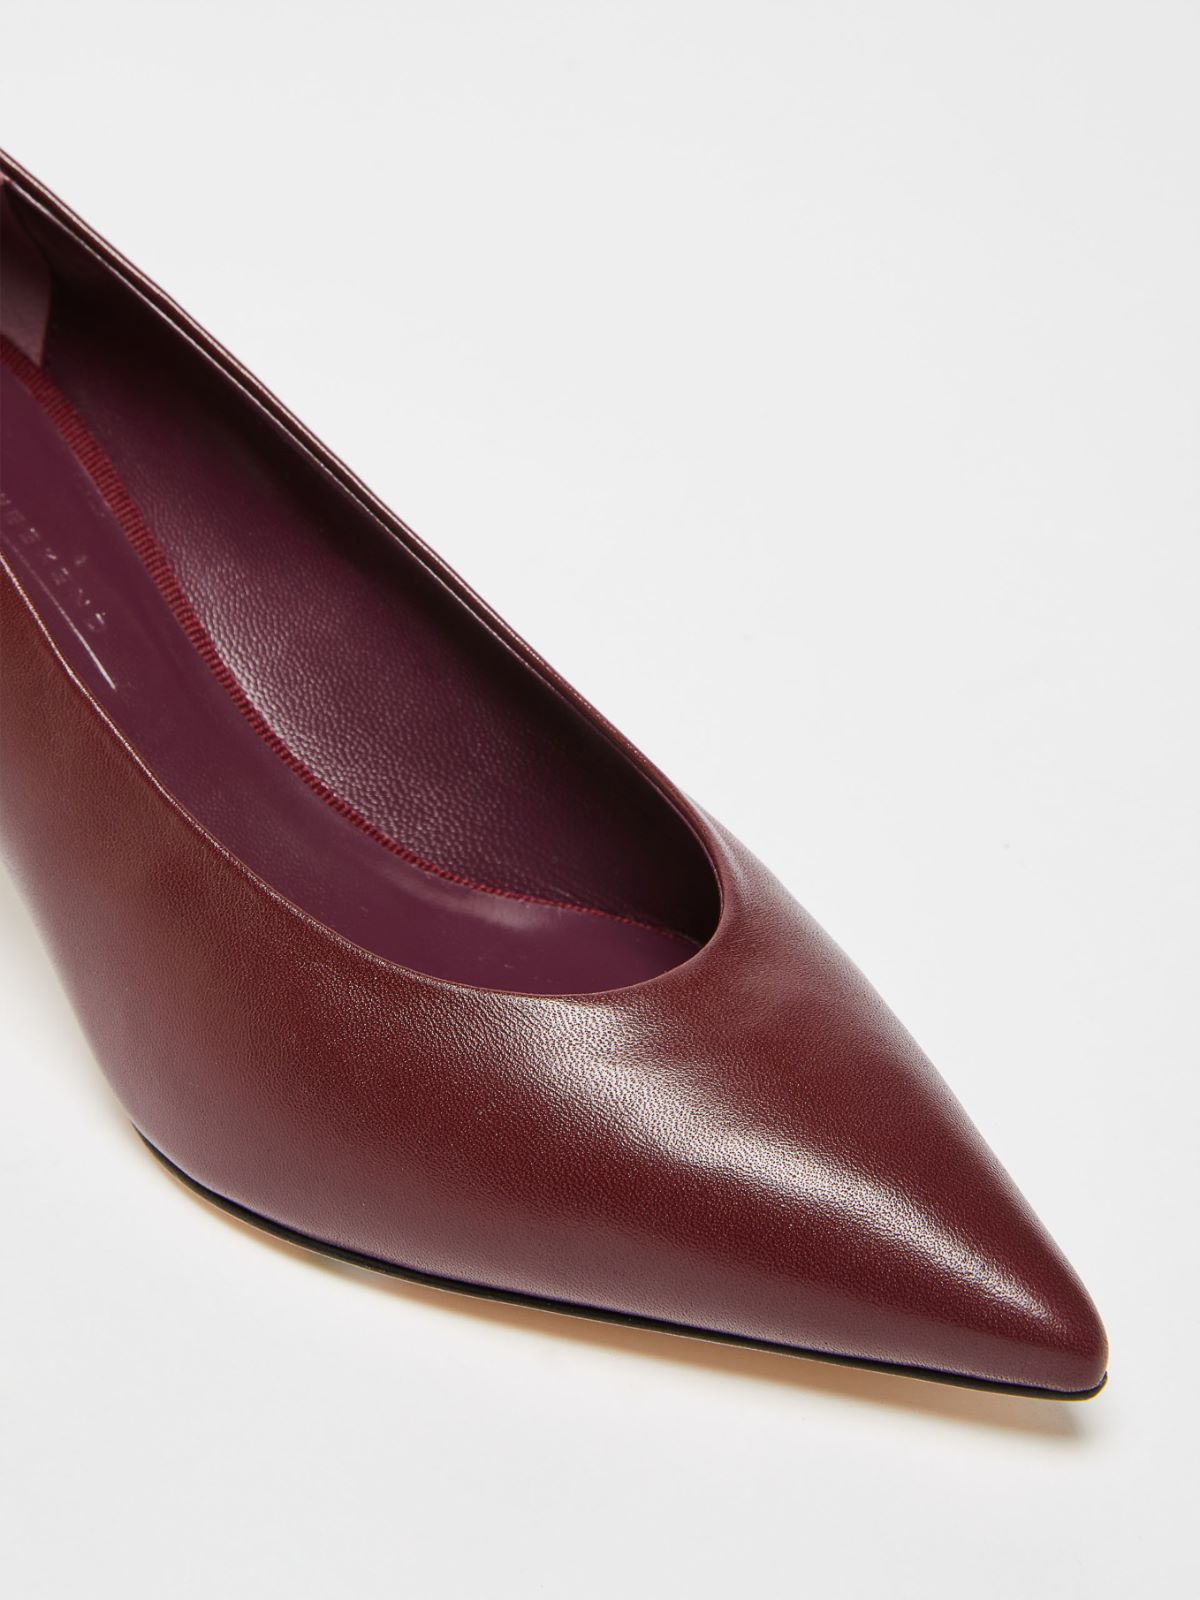 Nappa leather court shoes - BORDEAUX - Weekend Max Mara - 4